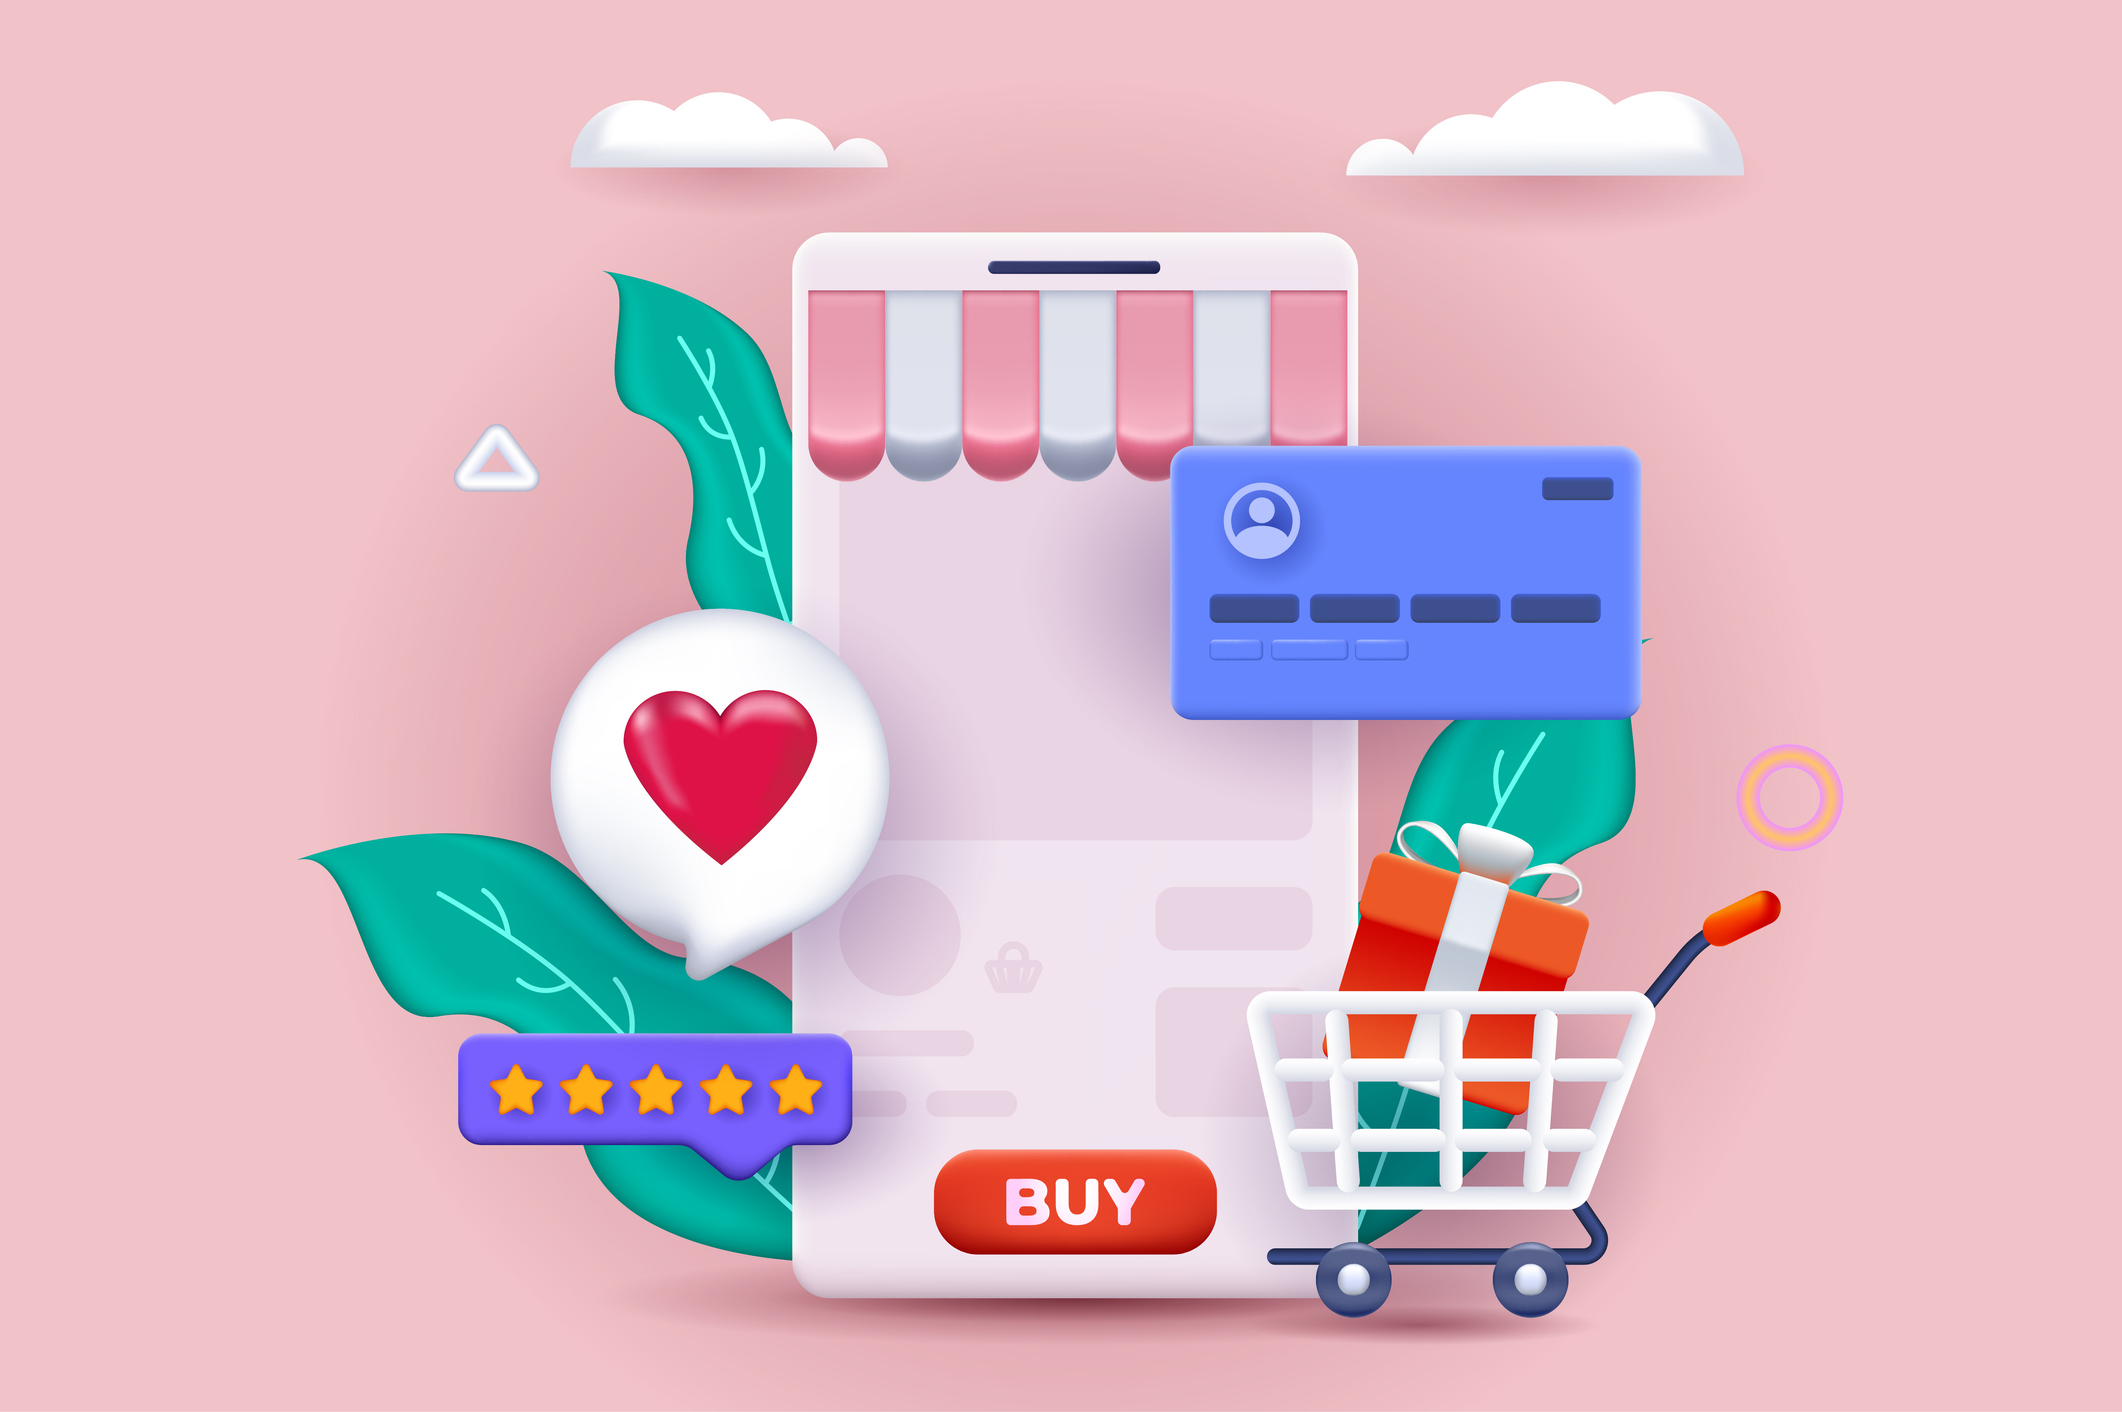 An illustration of the Online Brand Shop that boosts customer satisfaction